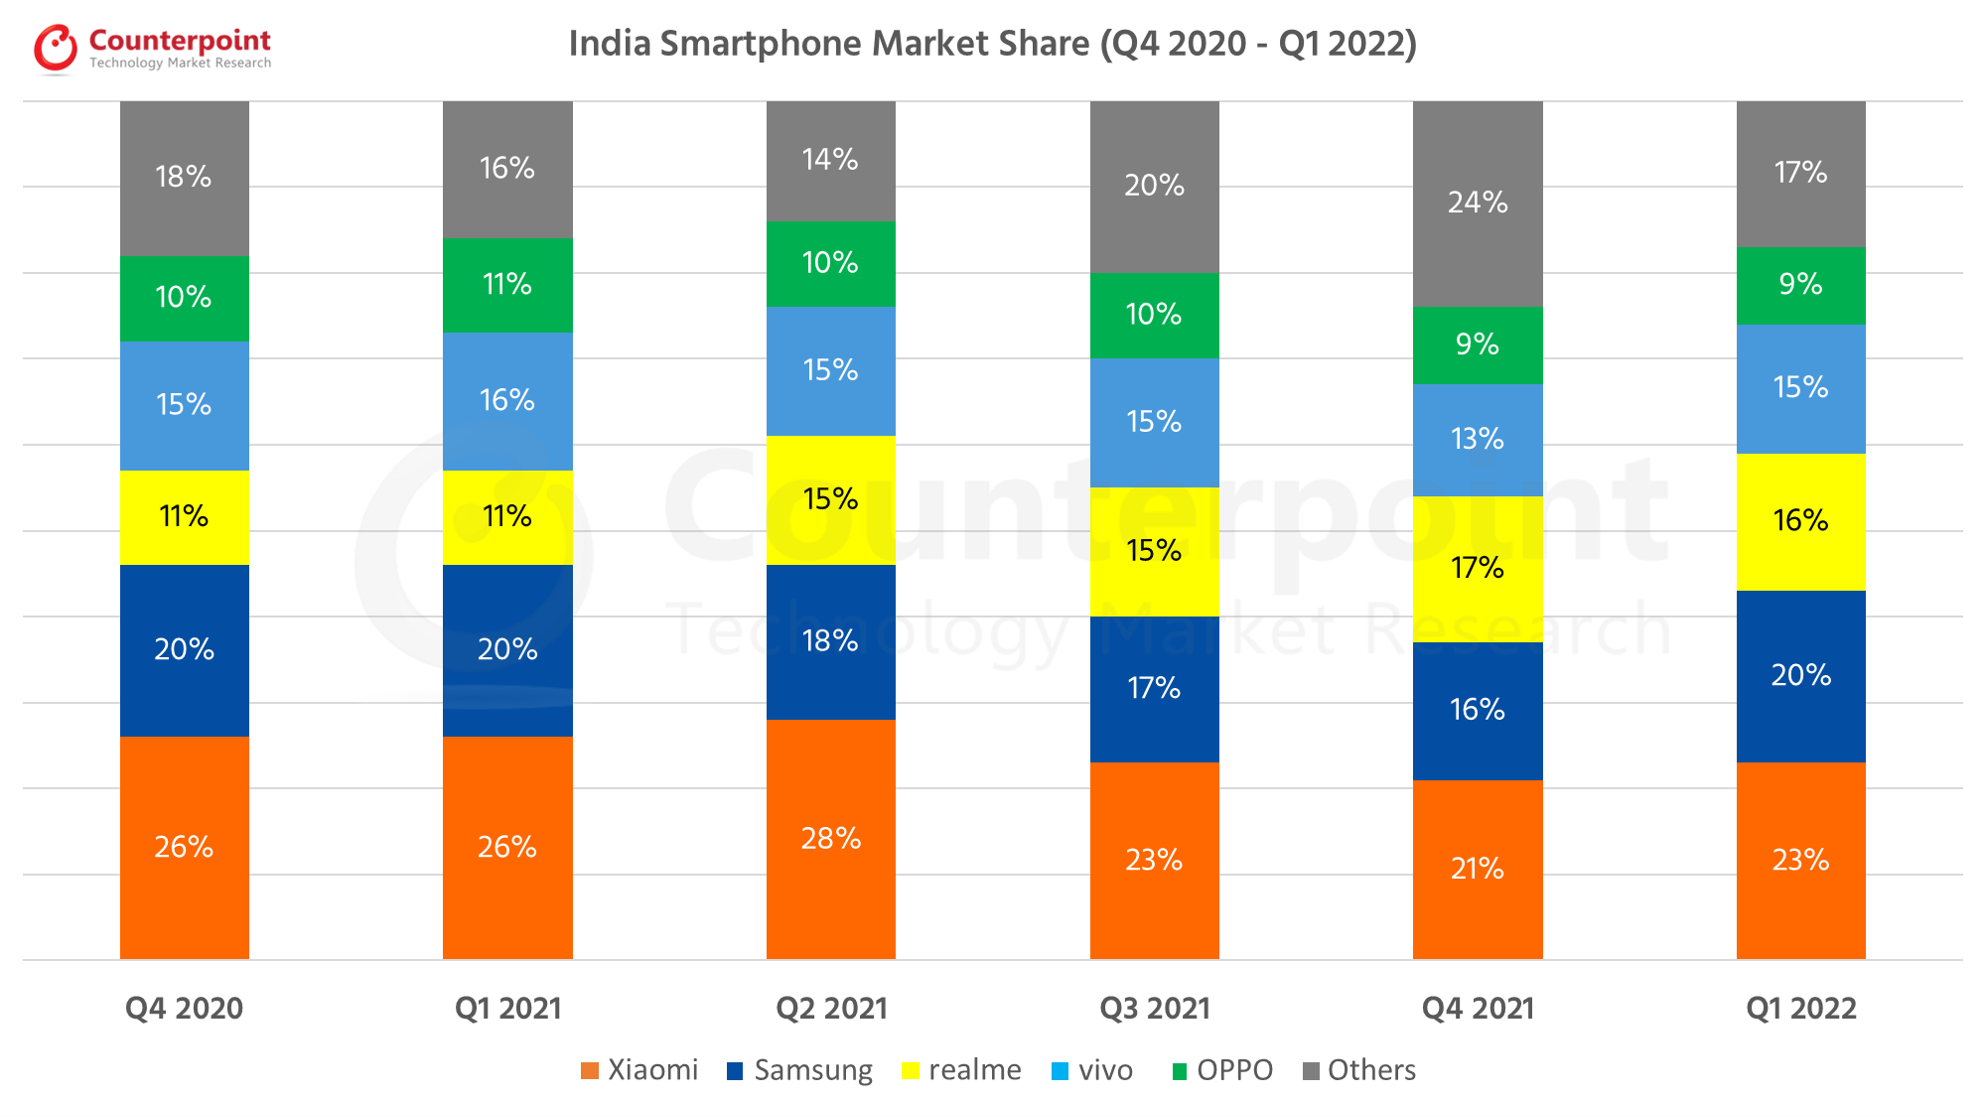 Counterpoint Research India Smartphone Market Q1 2022